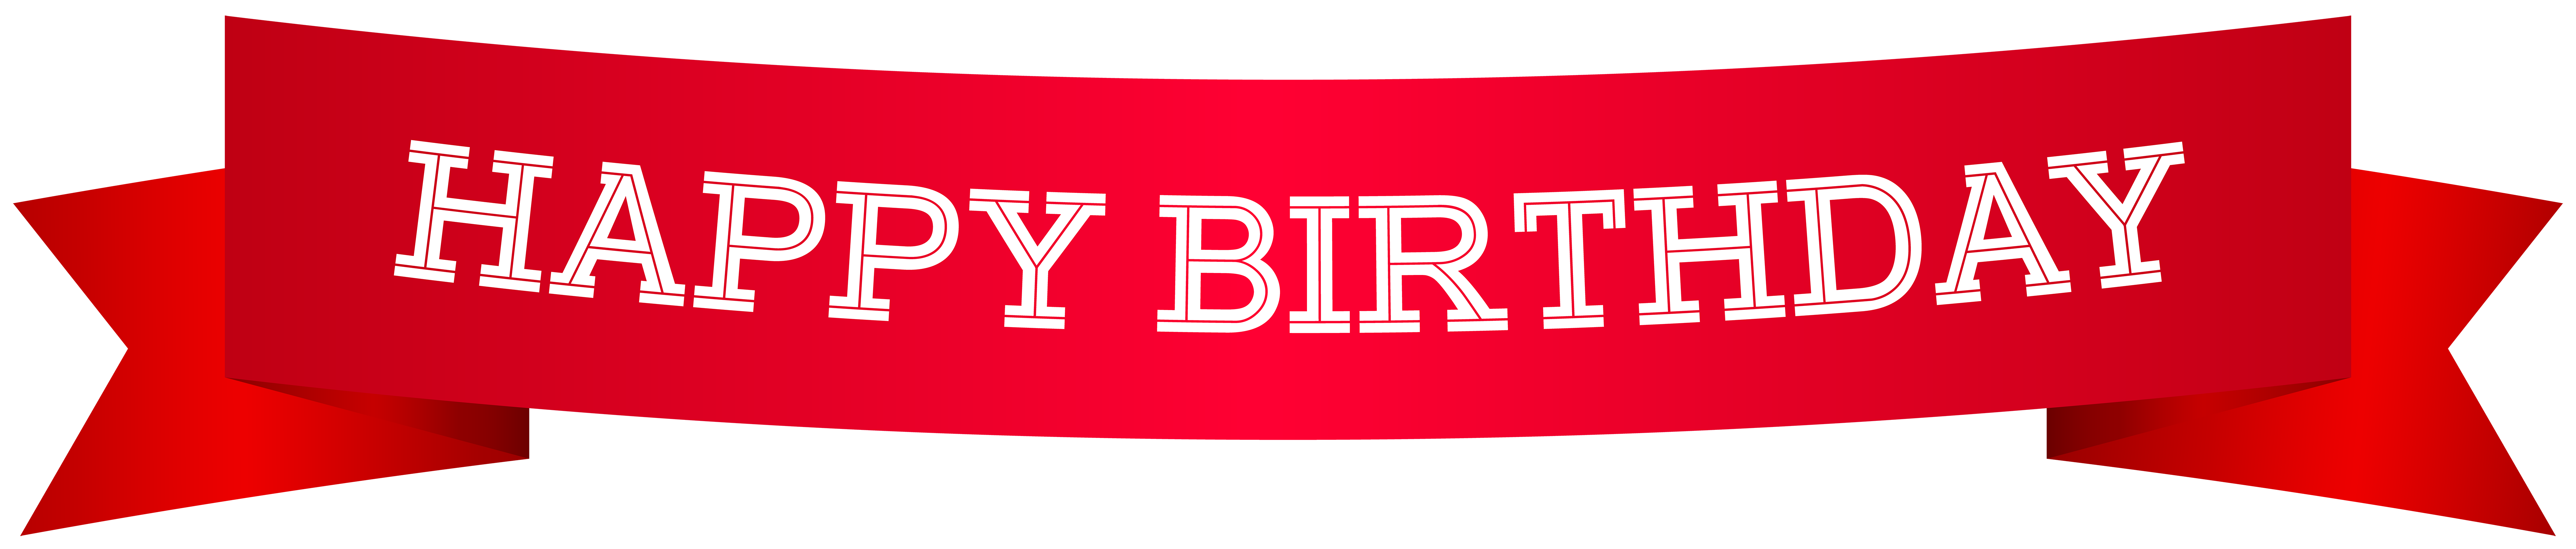 Clipart banner happy birthday. Red png clip art